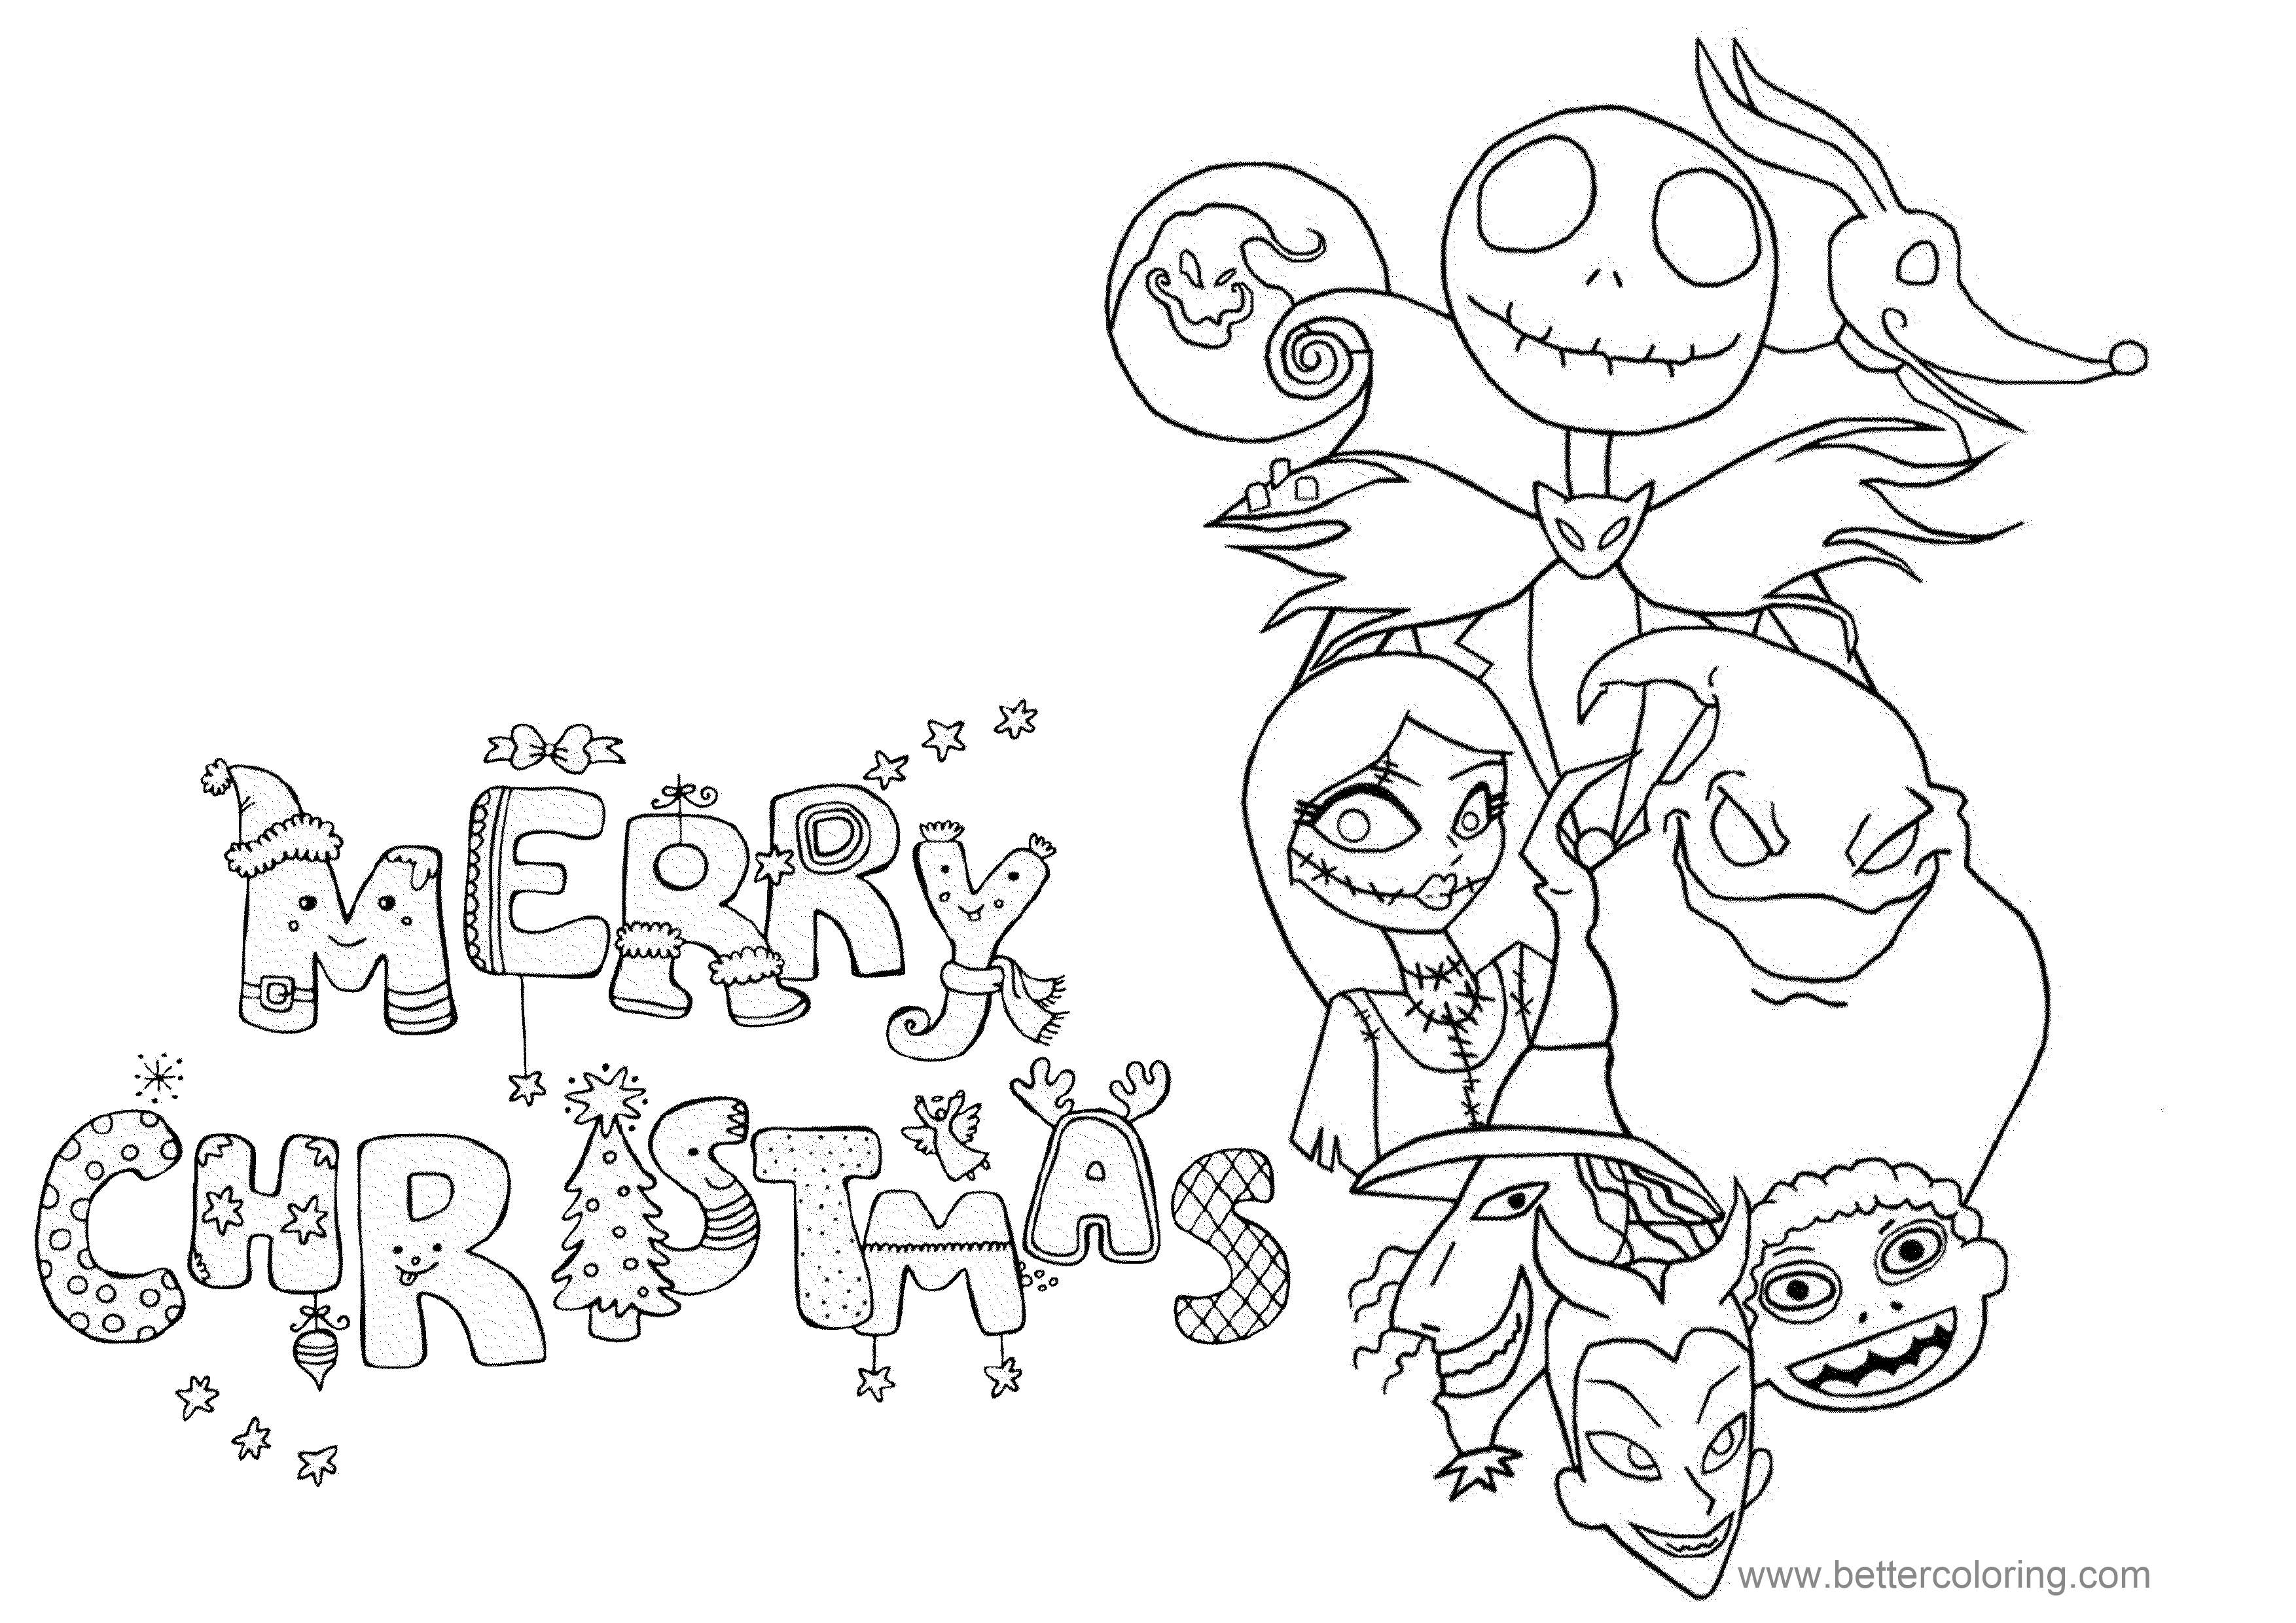 Free Detailed The Nightmare Before Christmas Coloring Pages printable